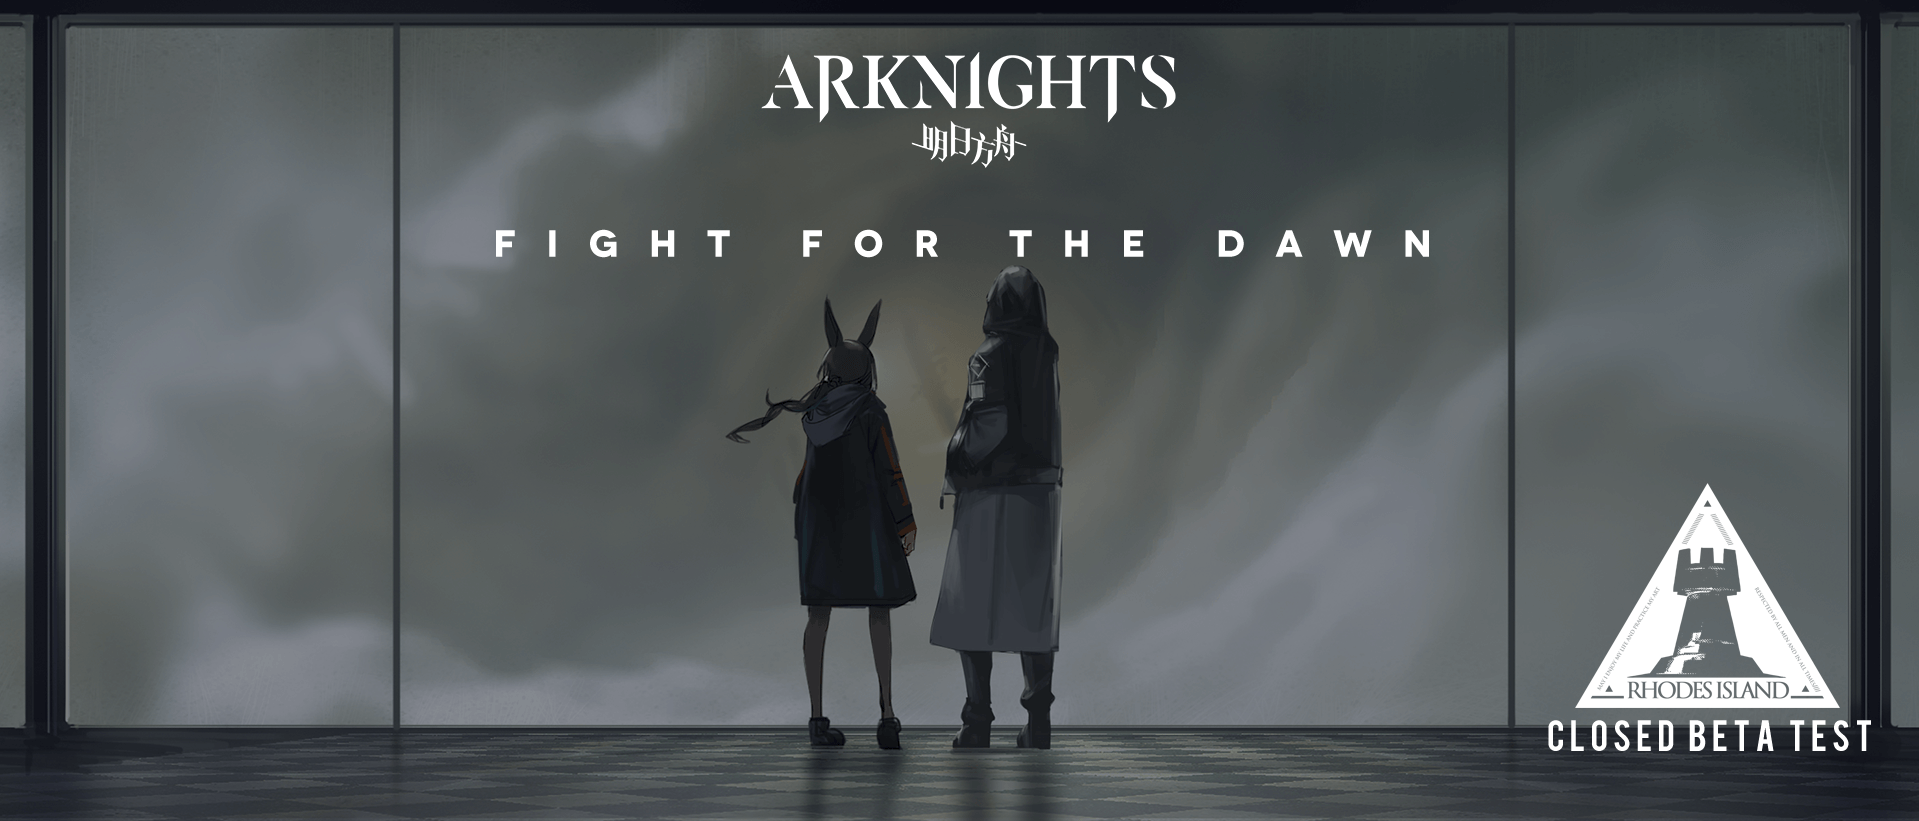 Download Arknights On Pc With Noxplayer Appcenter